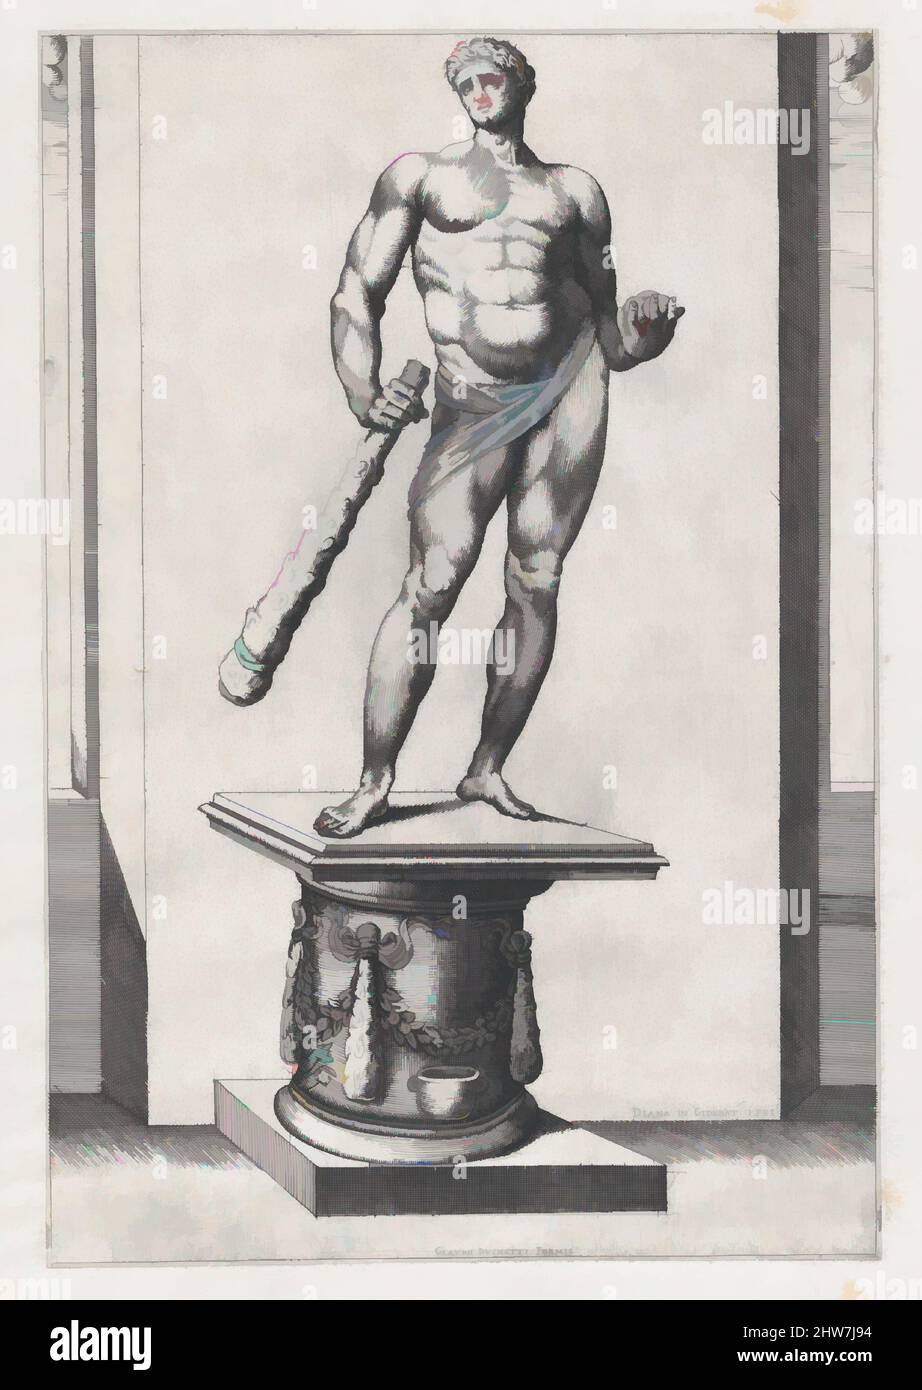 Art inspired by Speculum Romanae Magnificentiae: Hercules with the apples of the Hesperides, 1581, Engraving, plate: 13 3/4 x 9 1/4 in. (35 x 23.5 cm), Prints, Diana Scultori (Italian, Mantua ca. 1535?–after 1588 Rome, Classic works modernized by Artotop with a splash of modernity. Shapes, color and value, eye-catching visual impact on art. Emotions through freedom of artworks in a contemporary way. A timeless message pursuing a wildly creative new direction. Artists turning to the digital medium and creating the Artotop NFT Stock Photo